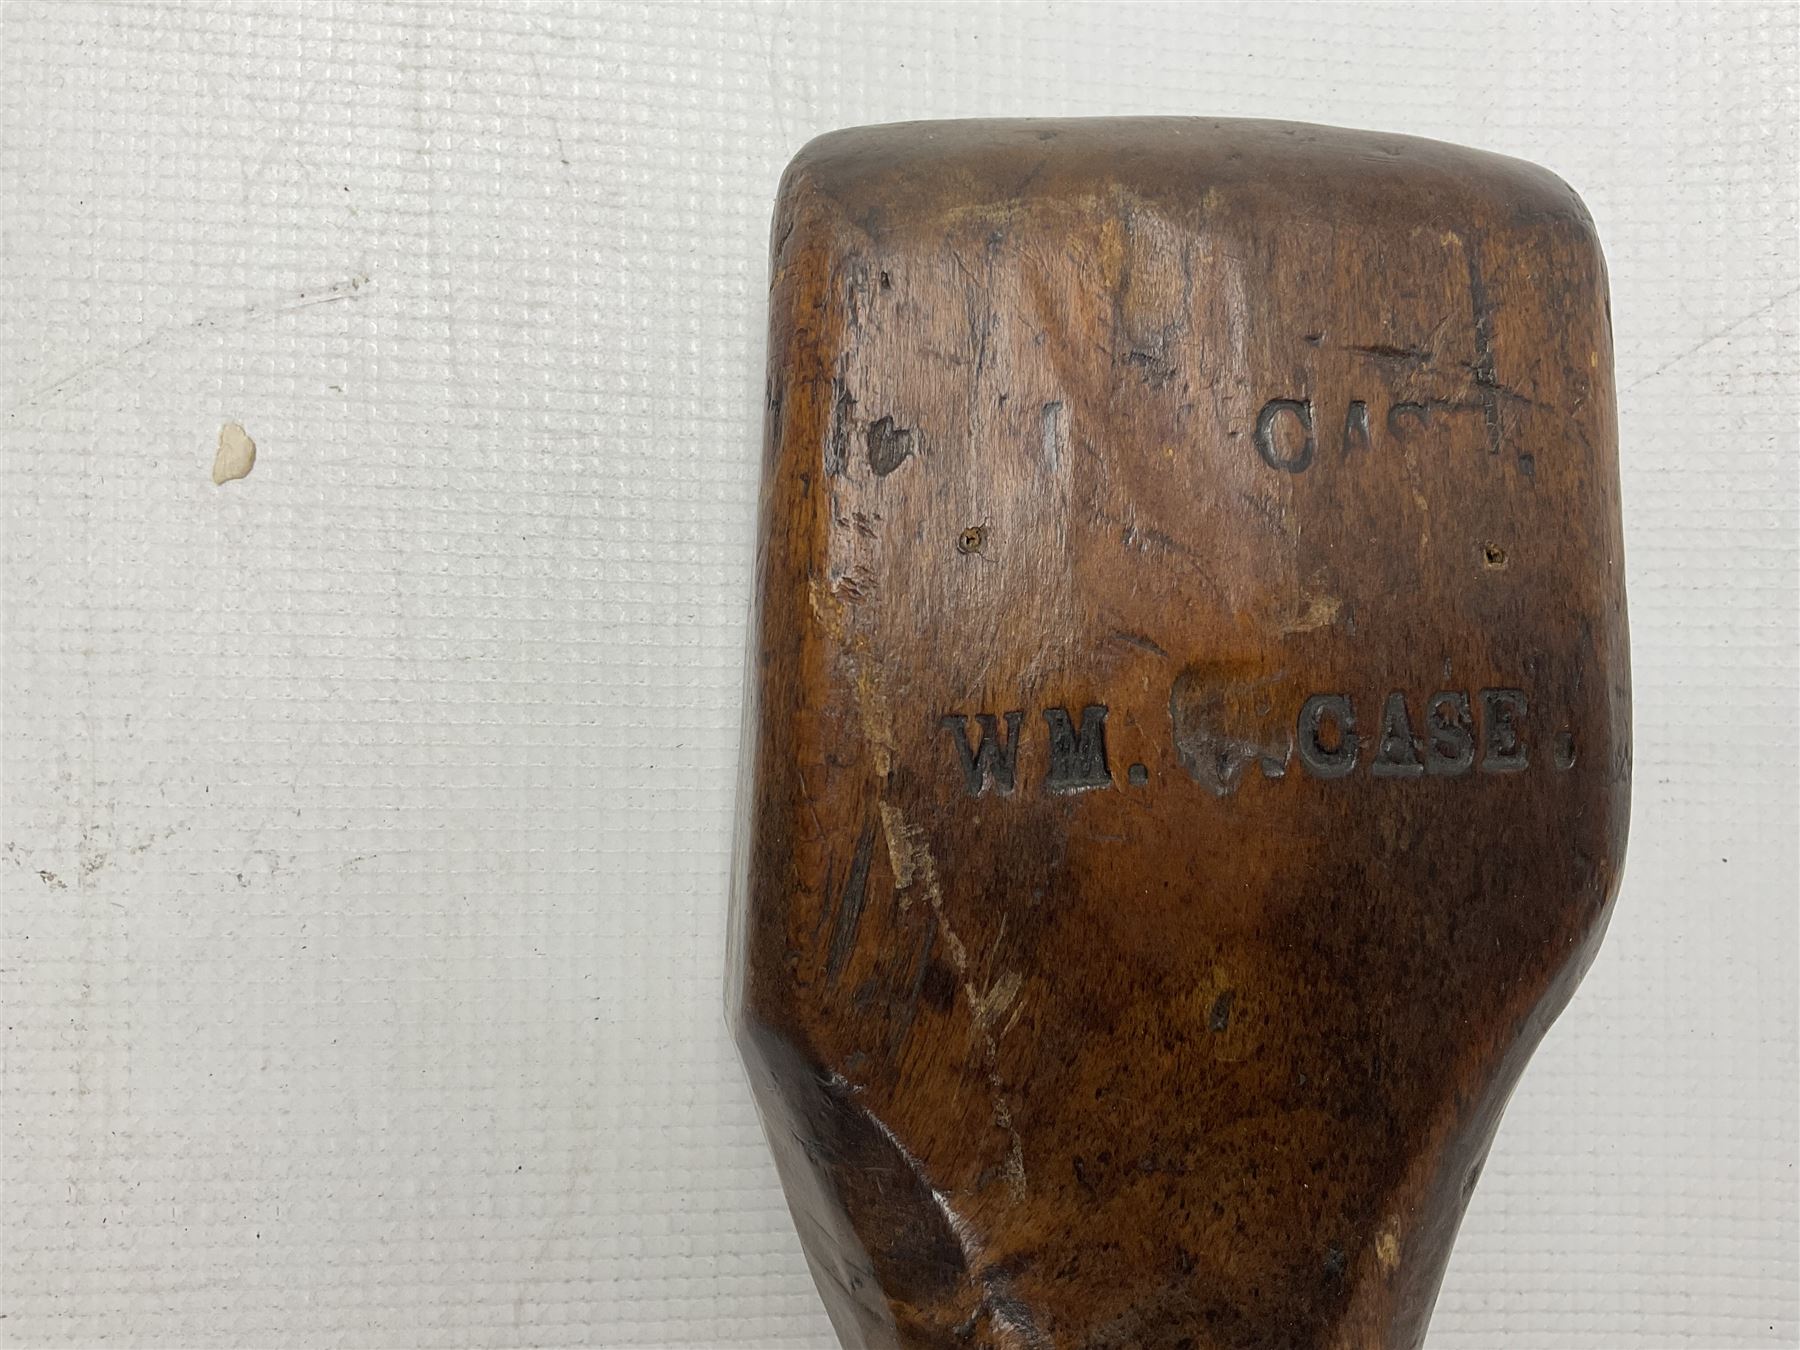 New England salt shovel stamped with W.M Case - Image 2 of 3